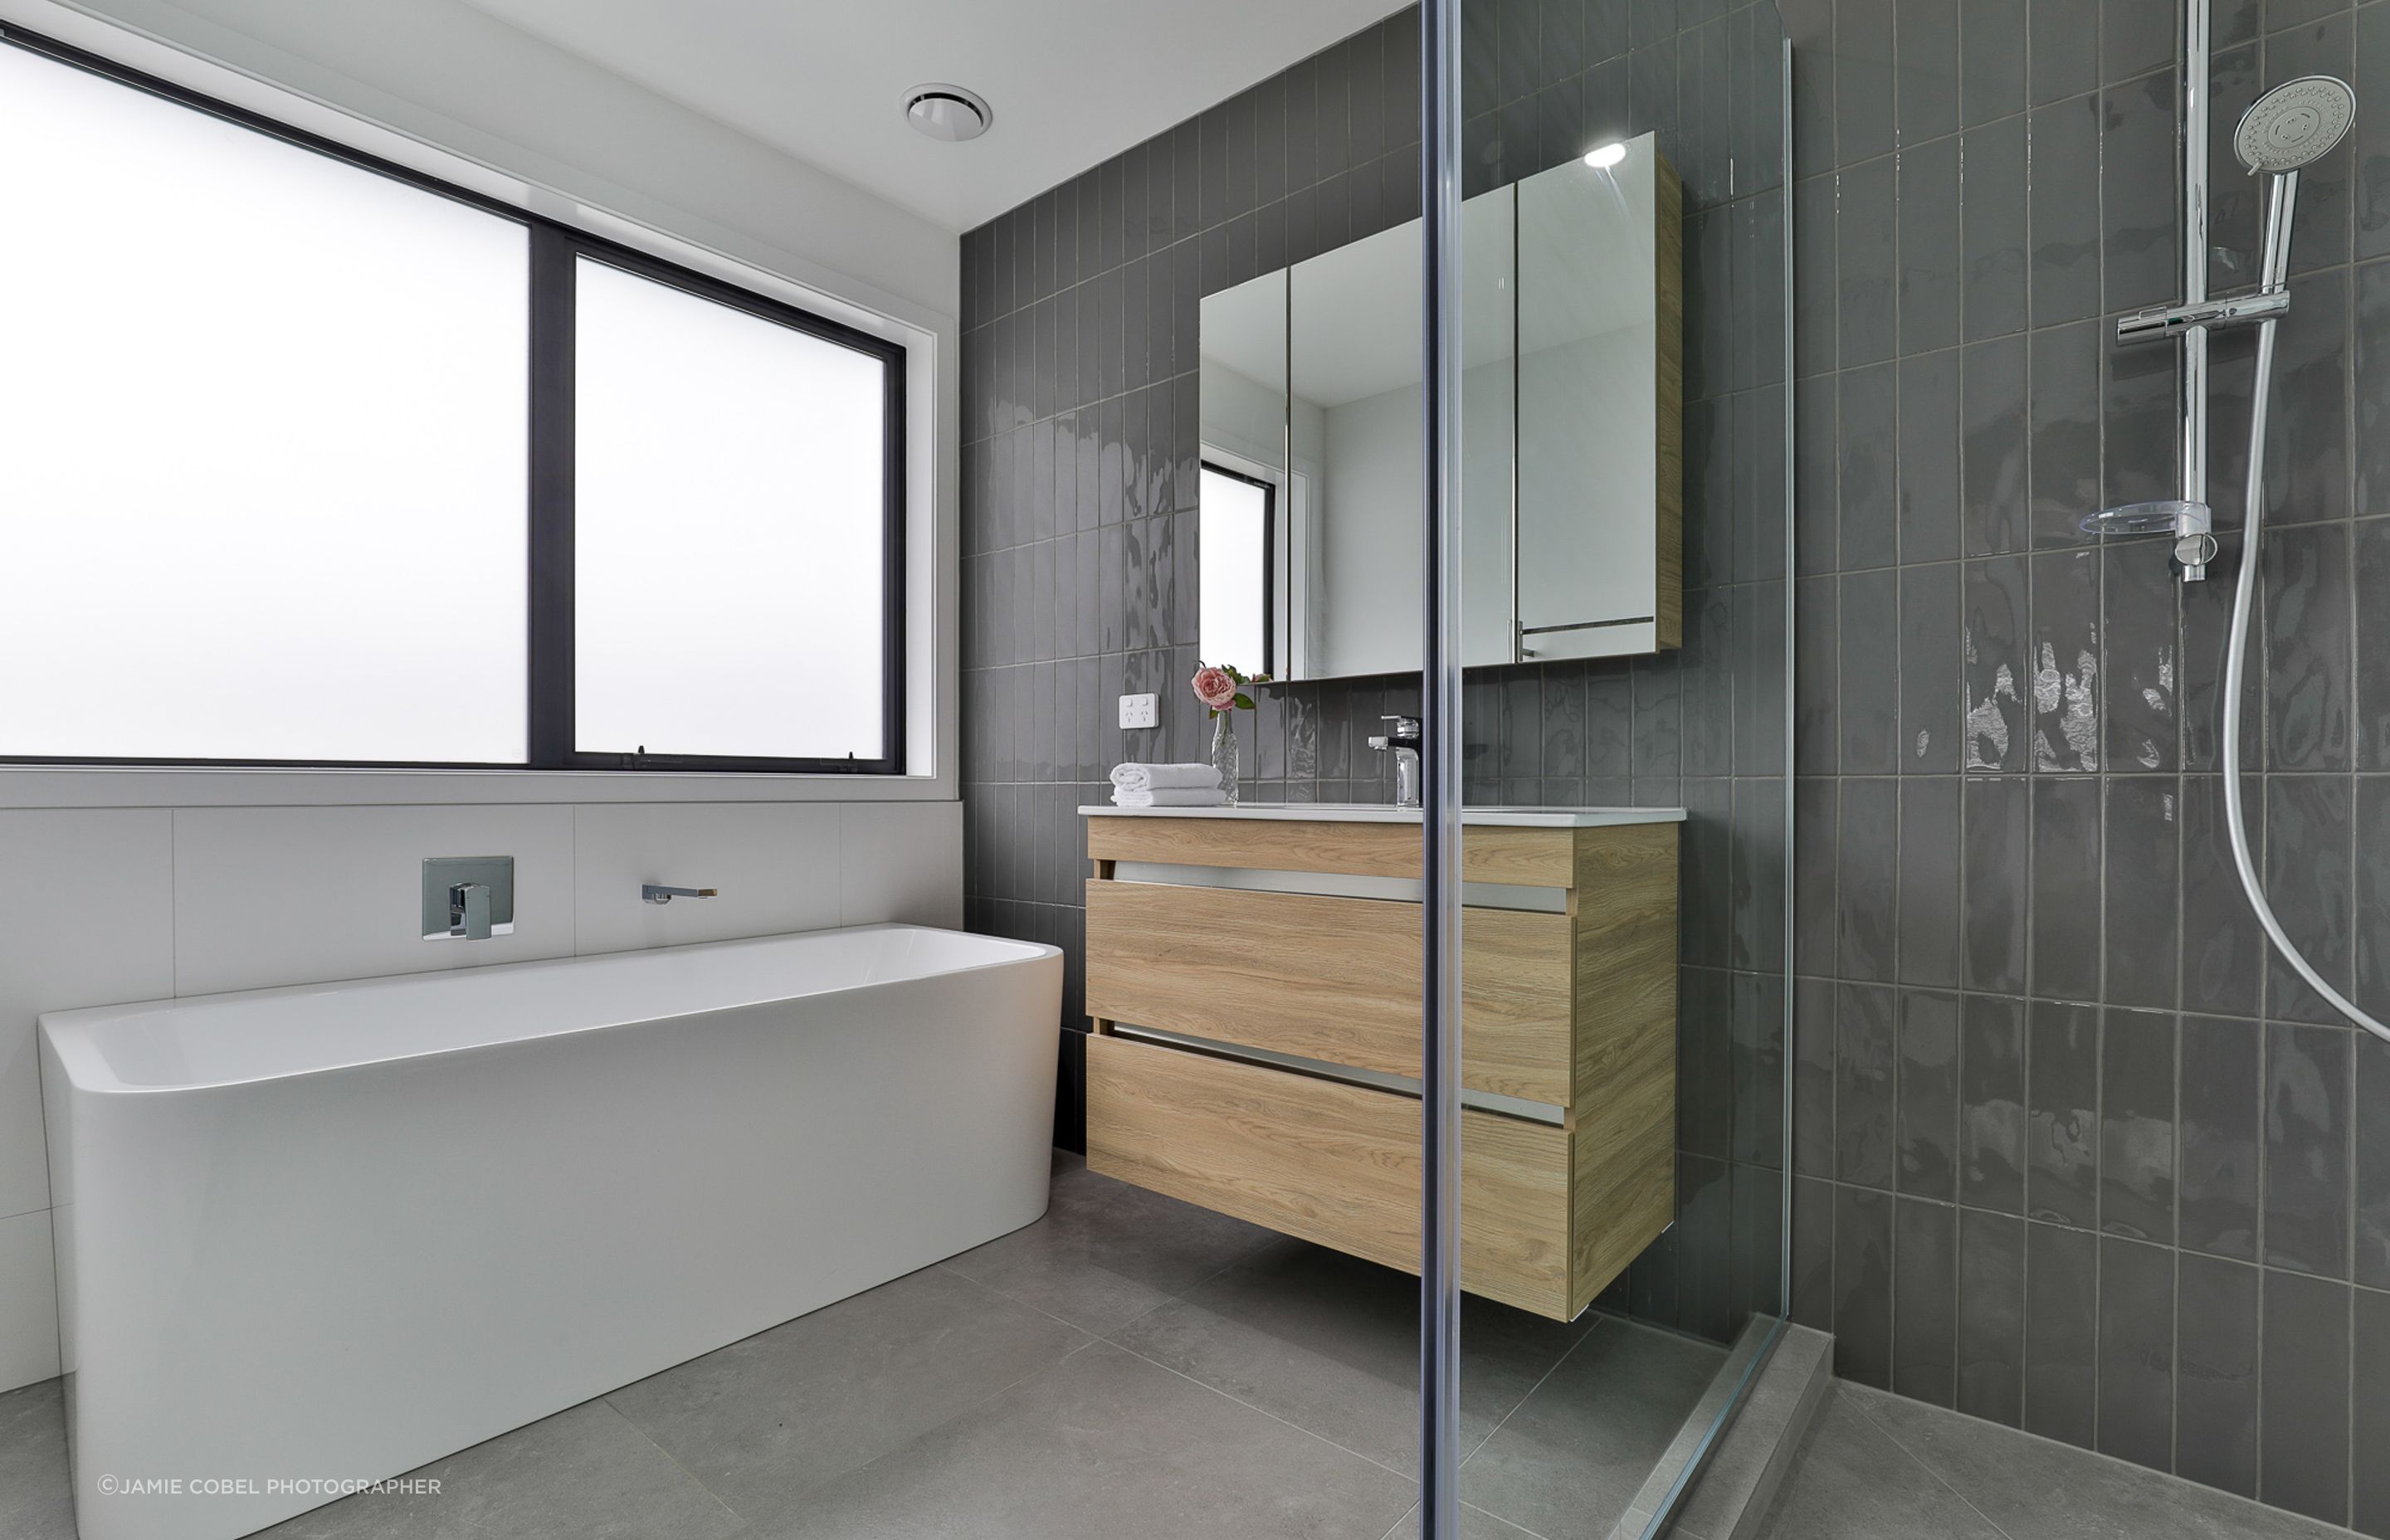 Main Bathroom: Super White Matt 600x600mm and Touch Graphite 75x300mm on walls with Lusso Pearl 600x600mm floors